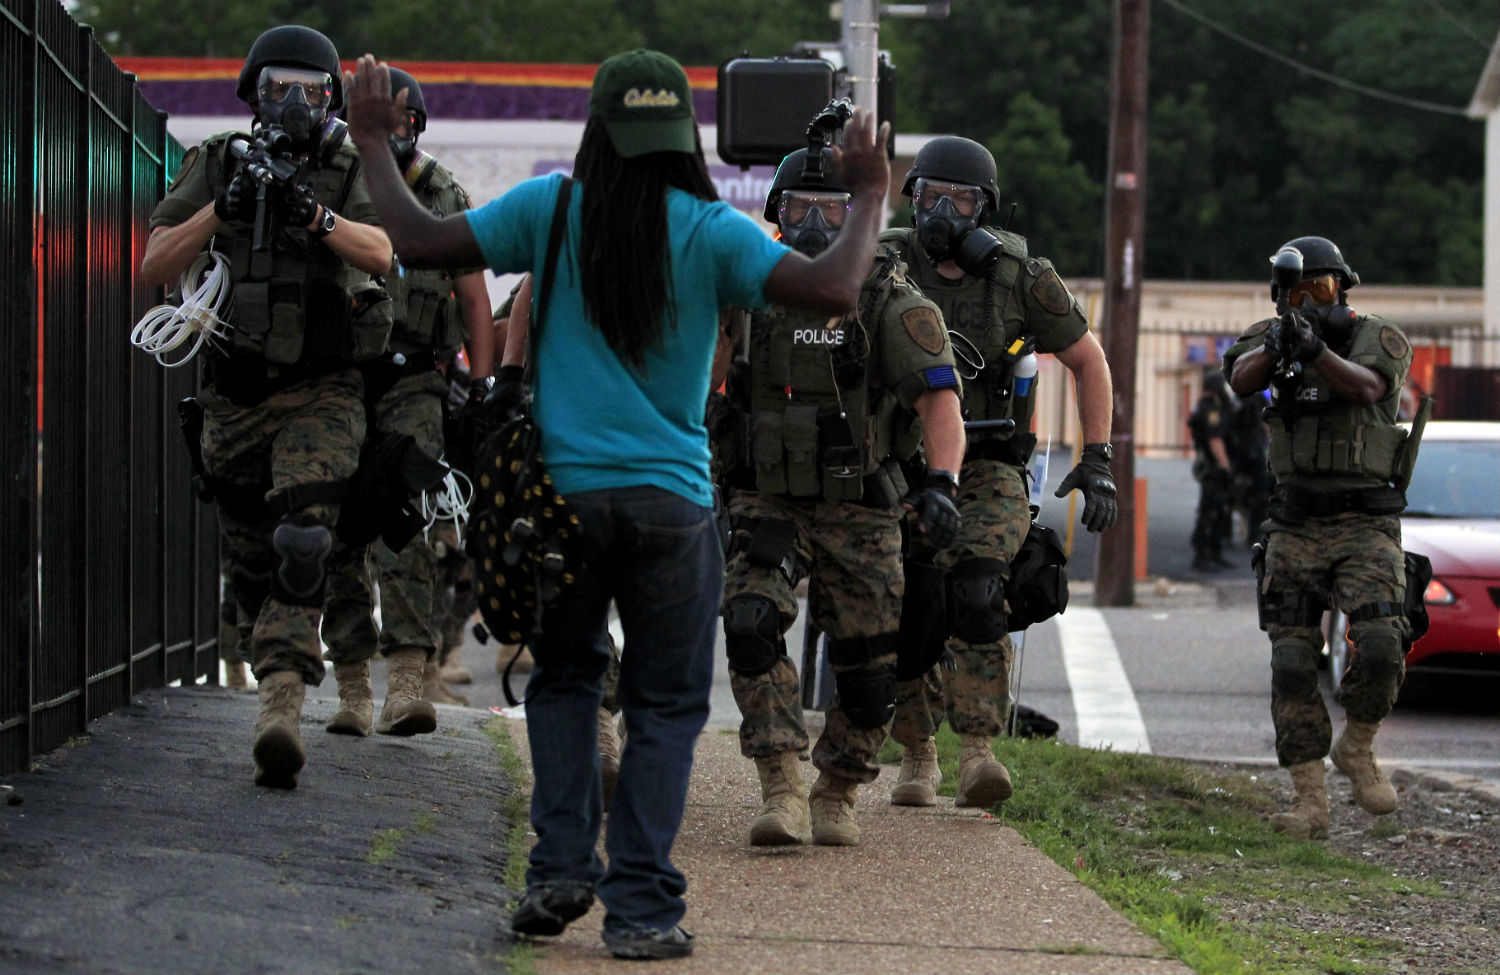 A Former Marine Explains All the Weapons of War Being Used by Police in Ferguson